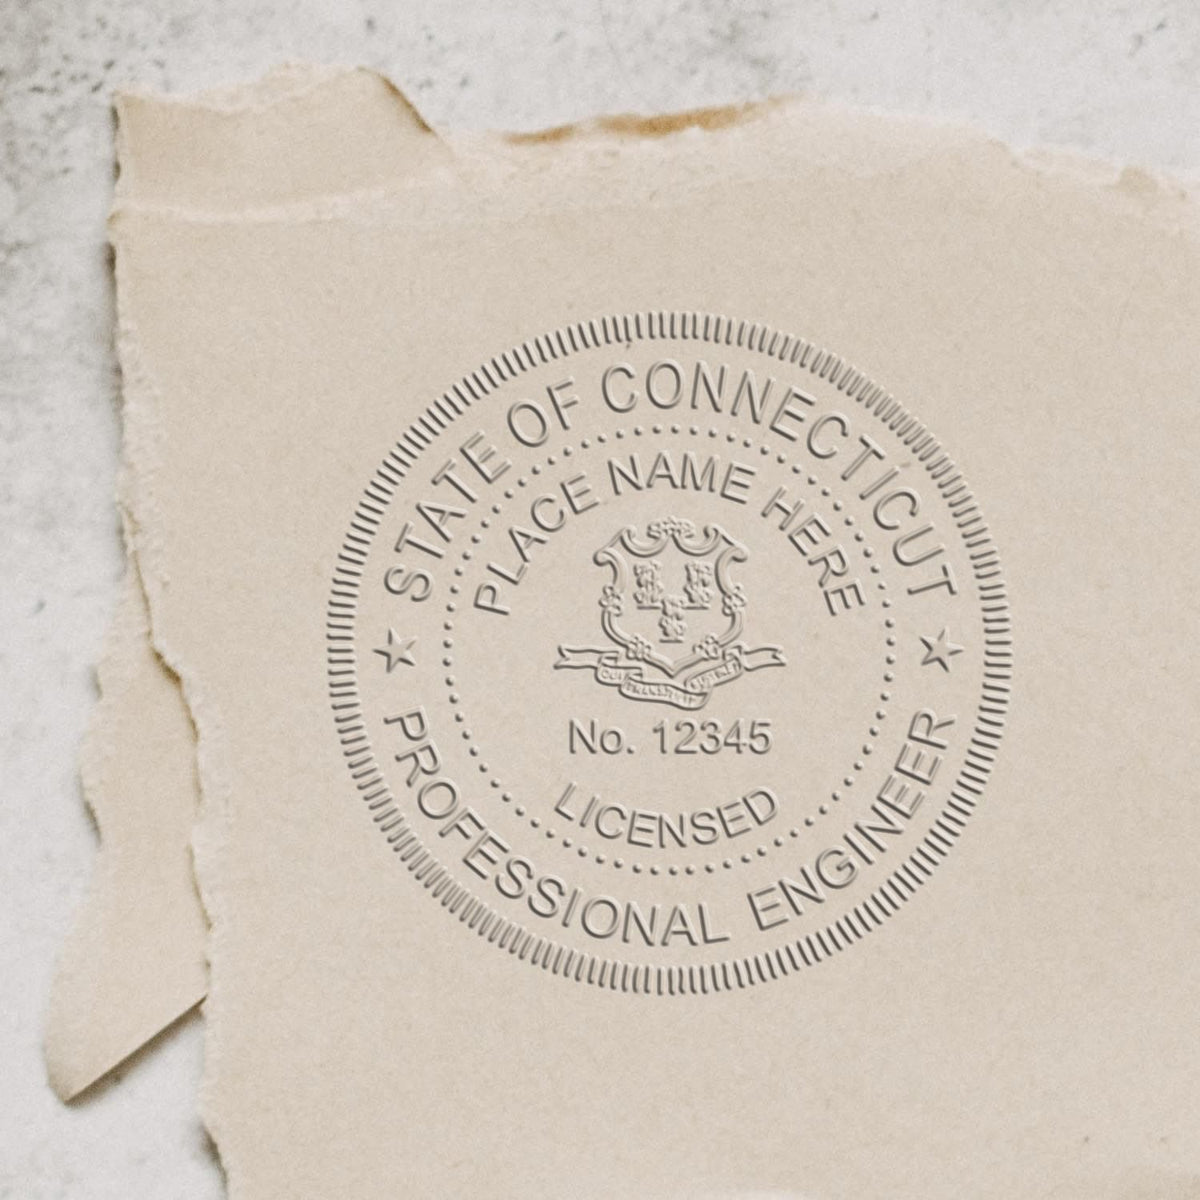 The Gift Connecticut Engineer Seal stamp impression comes to life with a crisp, detailed image stamped on paper - showcasing true professional quality.